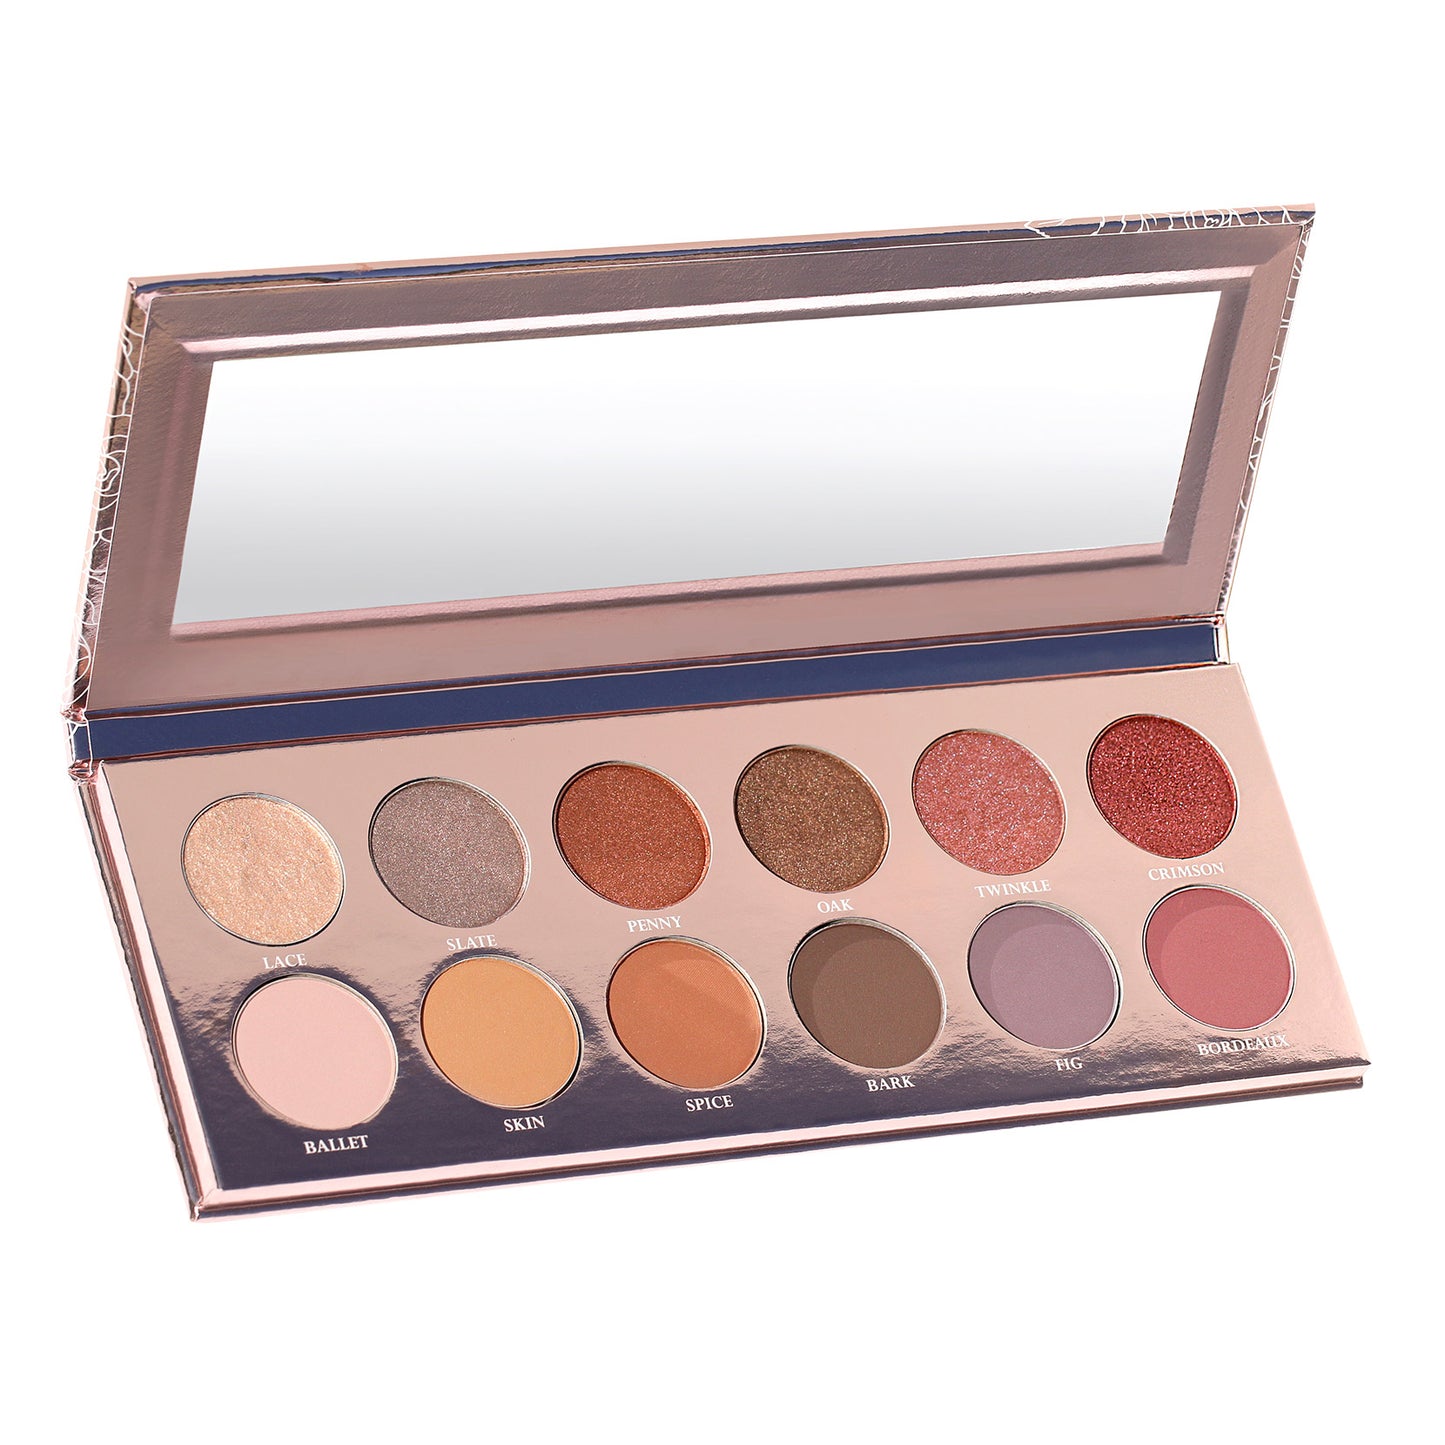 Girlactik Essential Eye Shadow Palette: A Must-Have for Every Makeup Enthusiast